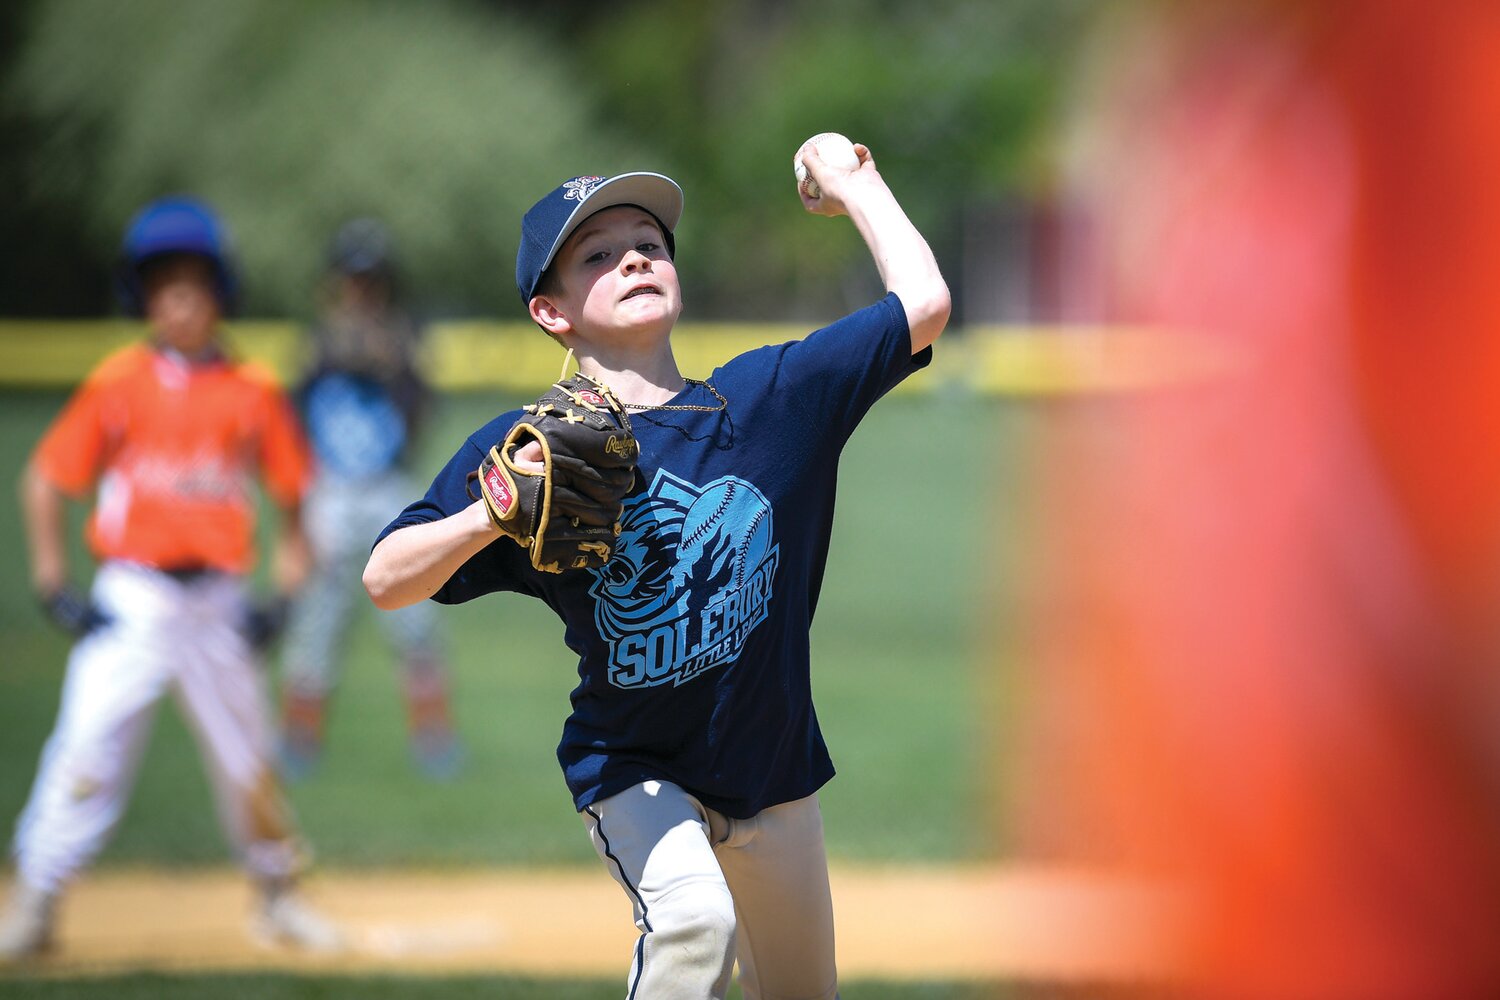 Joey Napoli, 10, pitches during a 10U Opening Day game.